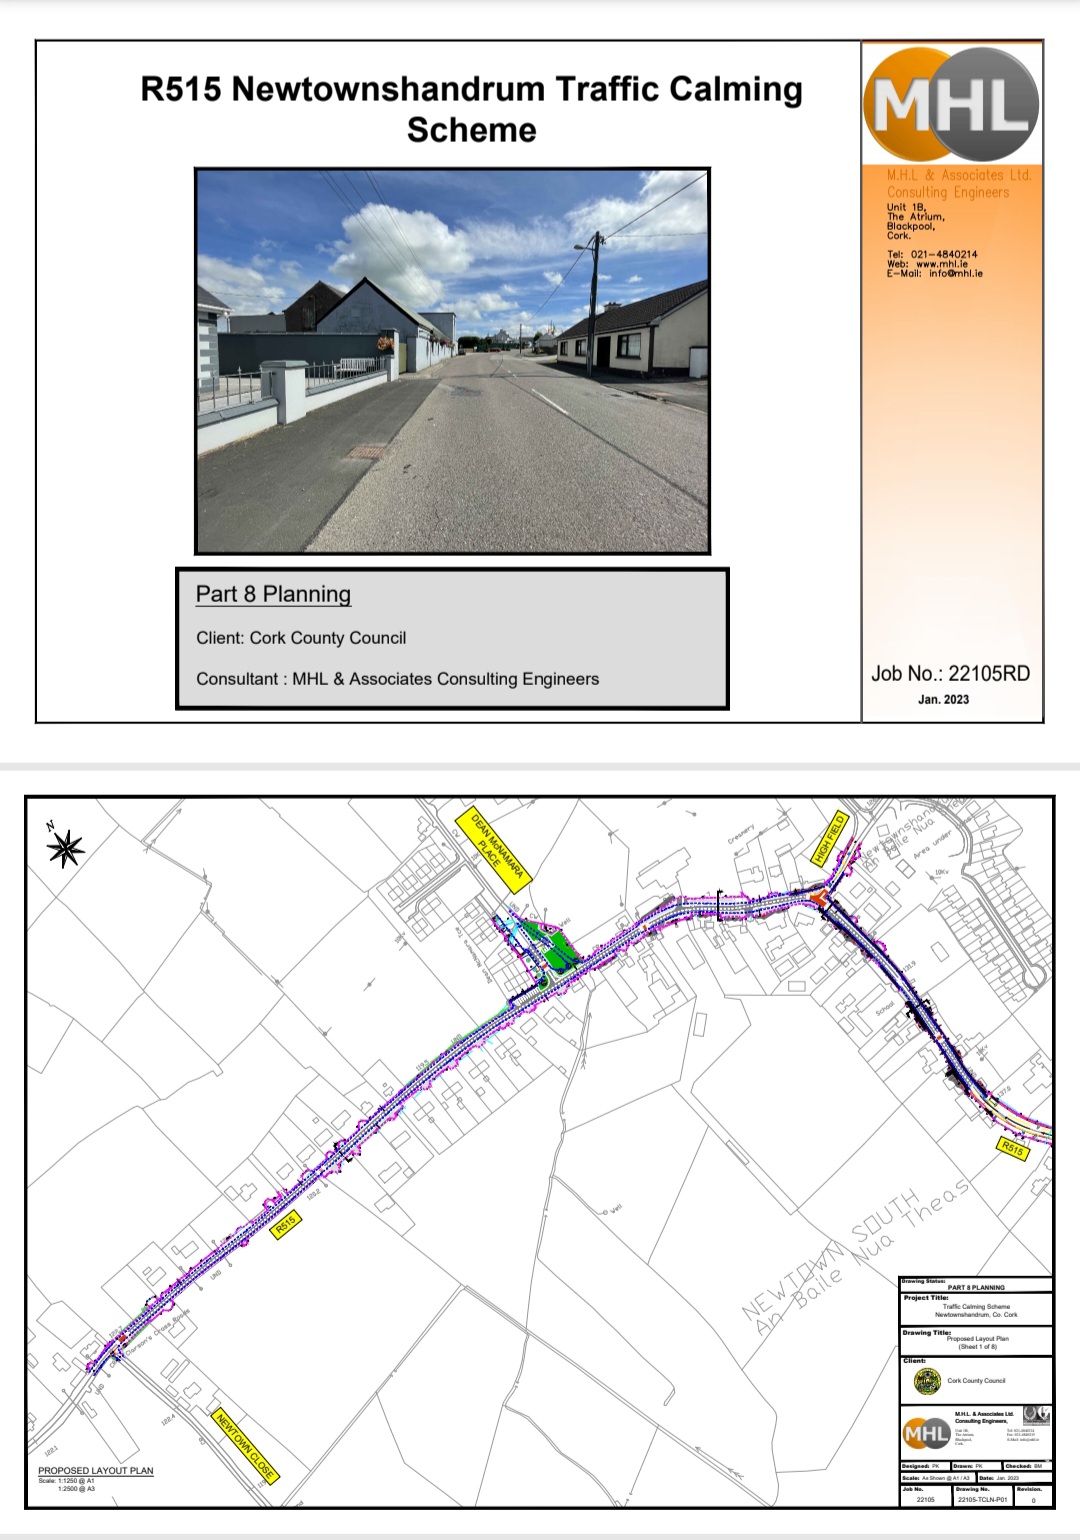 Proposals for Traffic Calming In Newtownshandrum Village Published